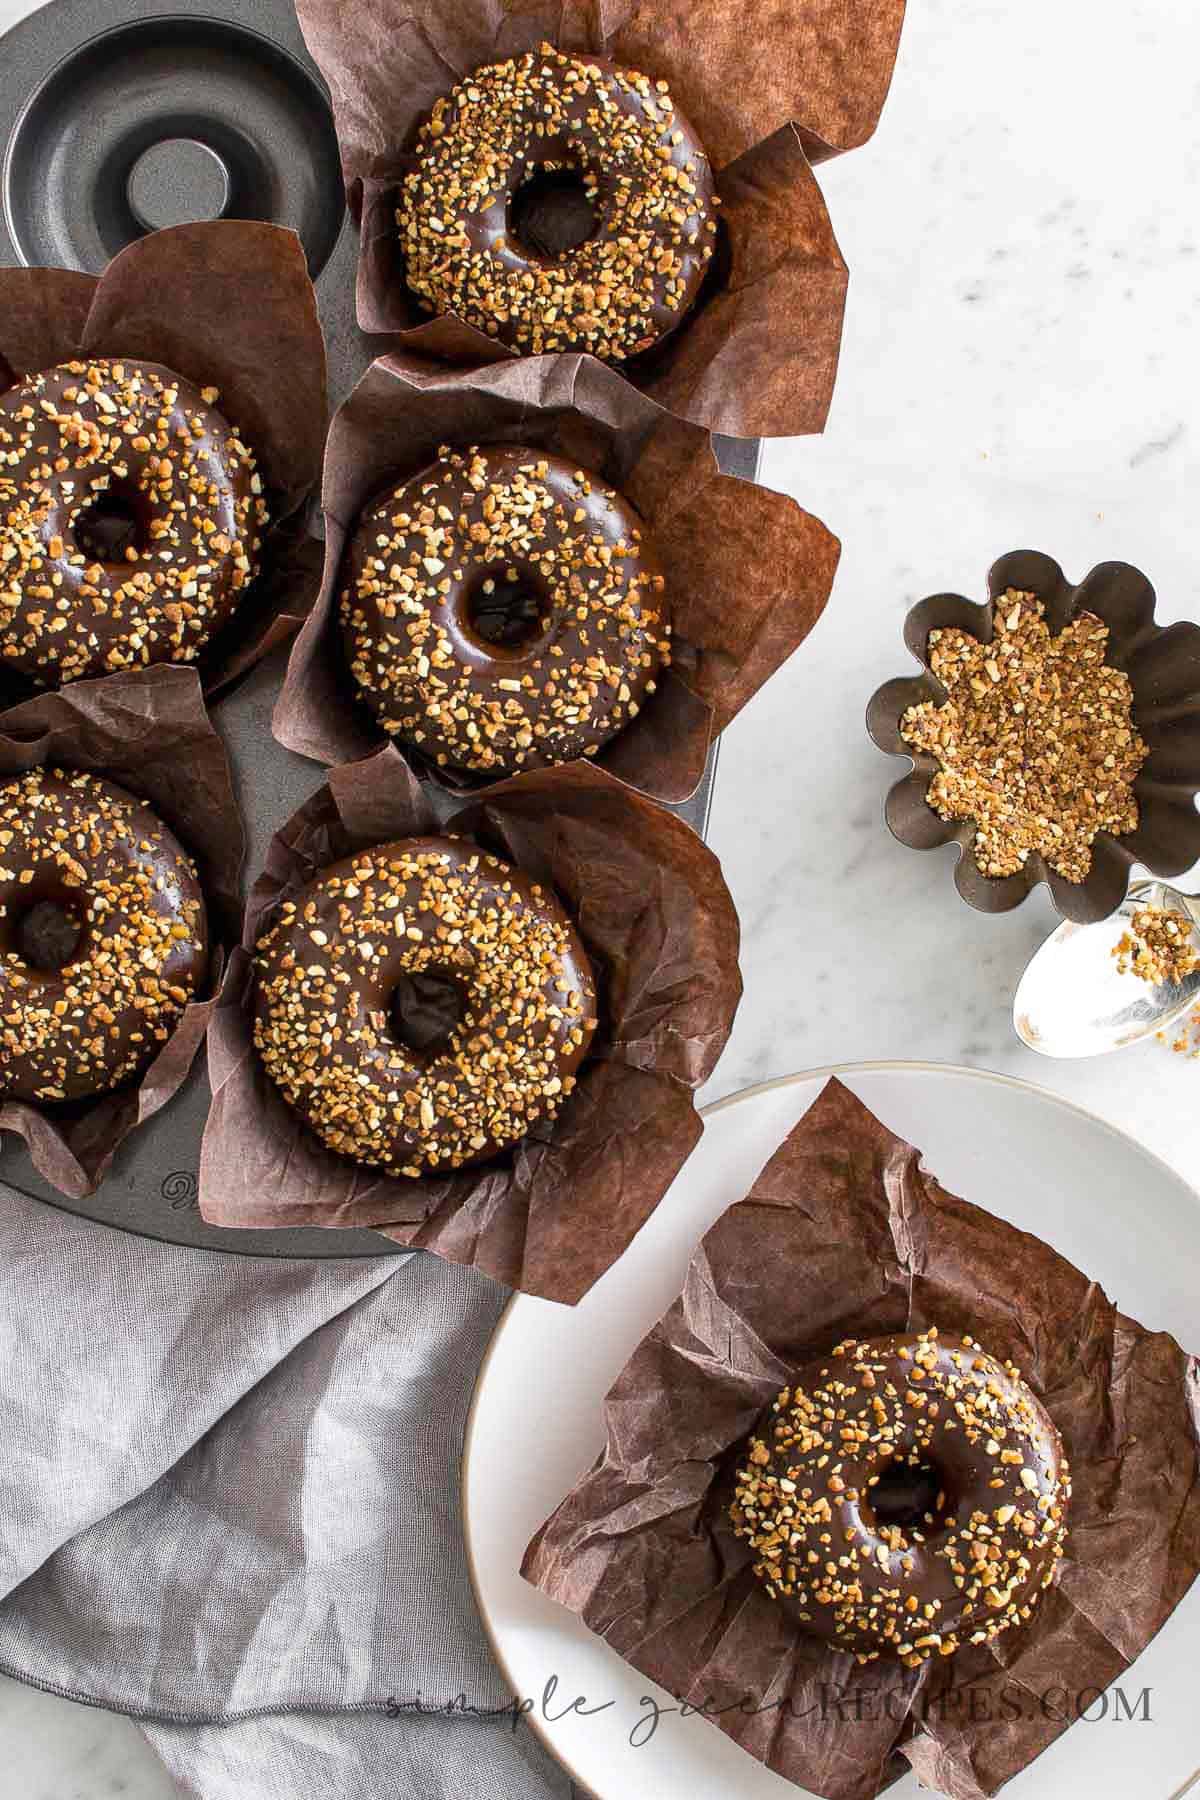 6 donuts frosted with glaze chocolate and crunchy almonds, on a brown muffin paper